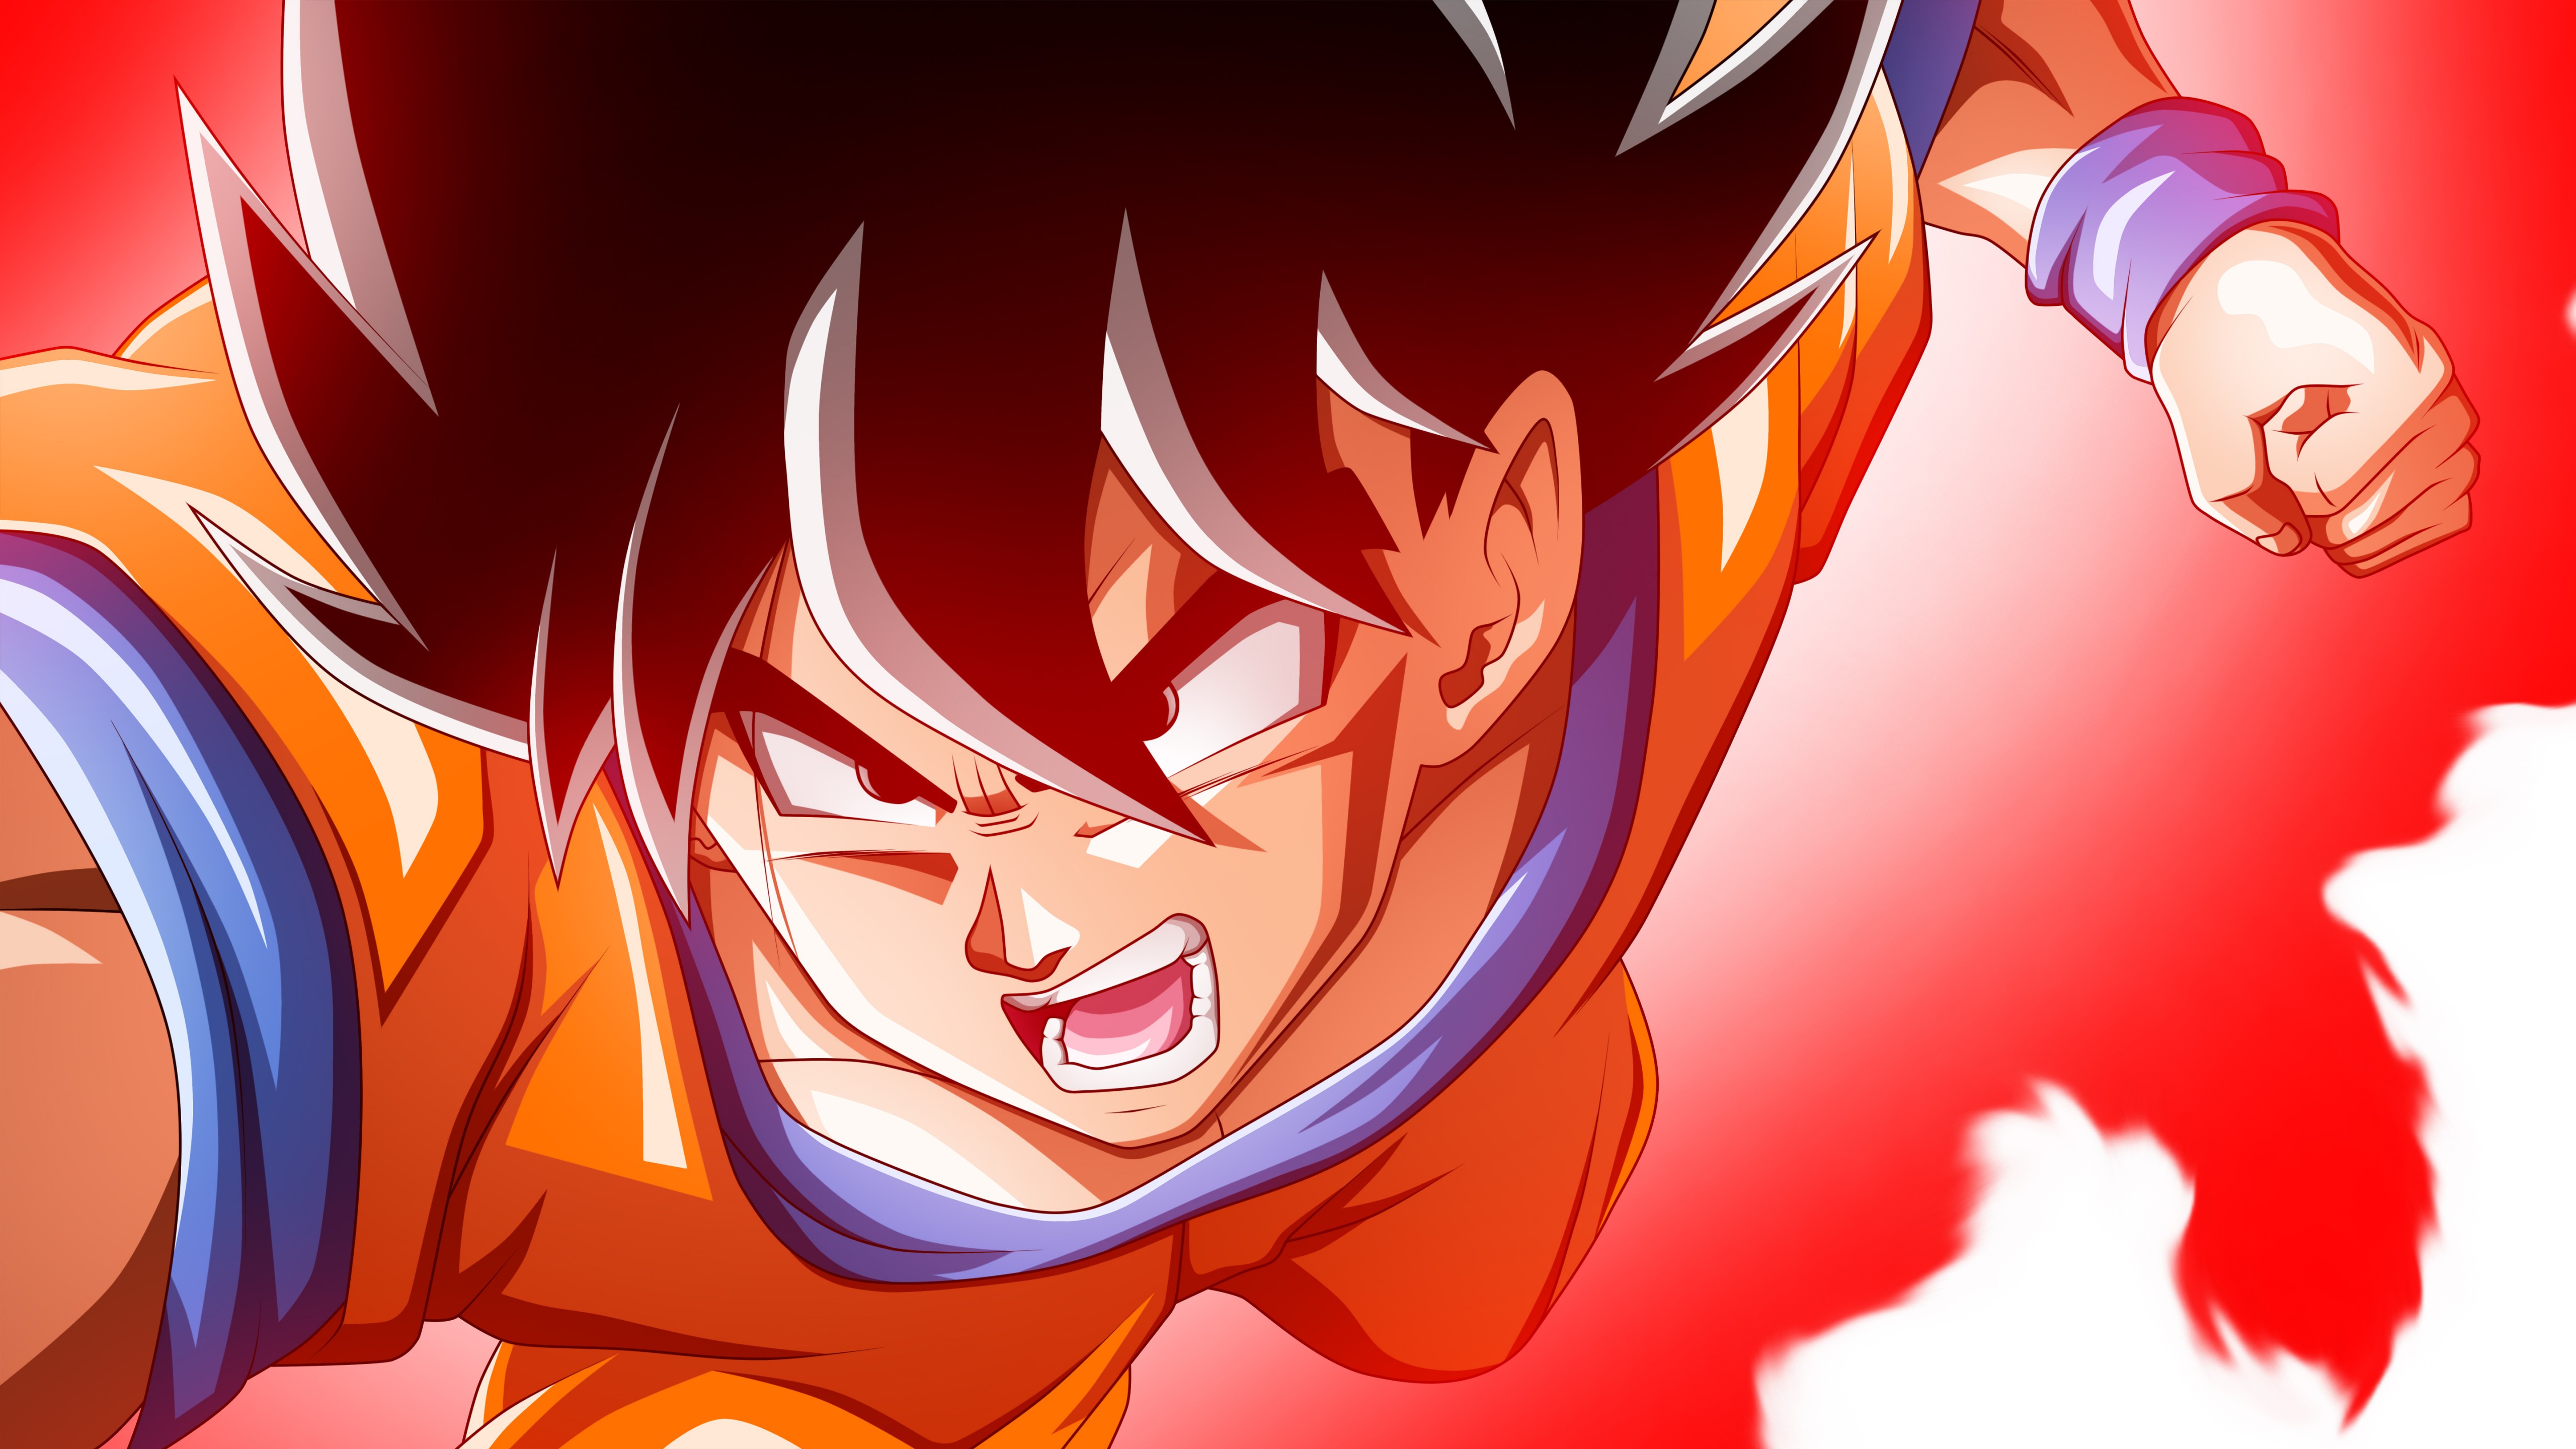 Son Goku In Dragon Ball Super 4K, Hd Anime, 4K Wallpapers, Images